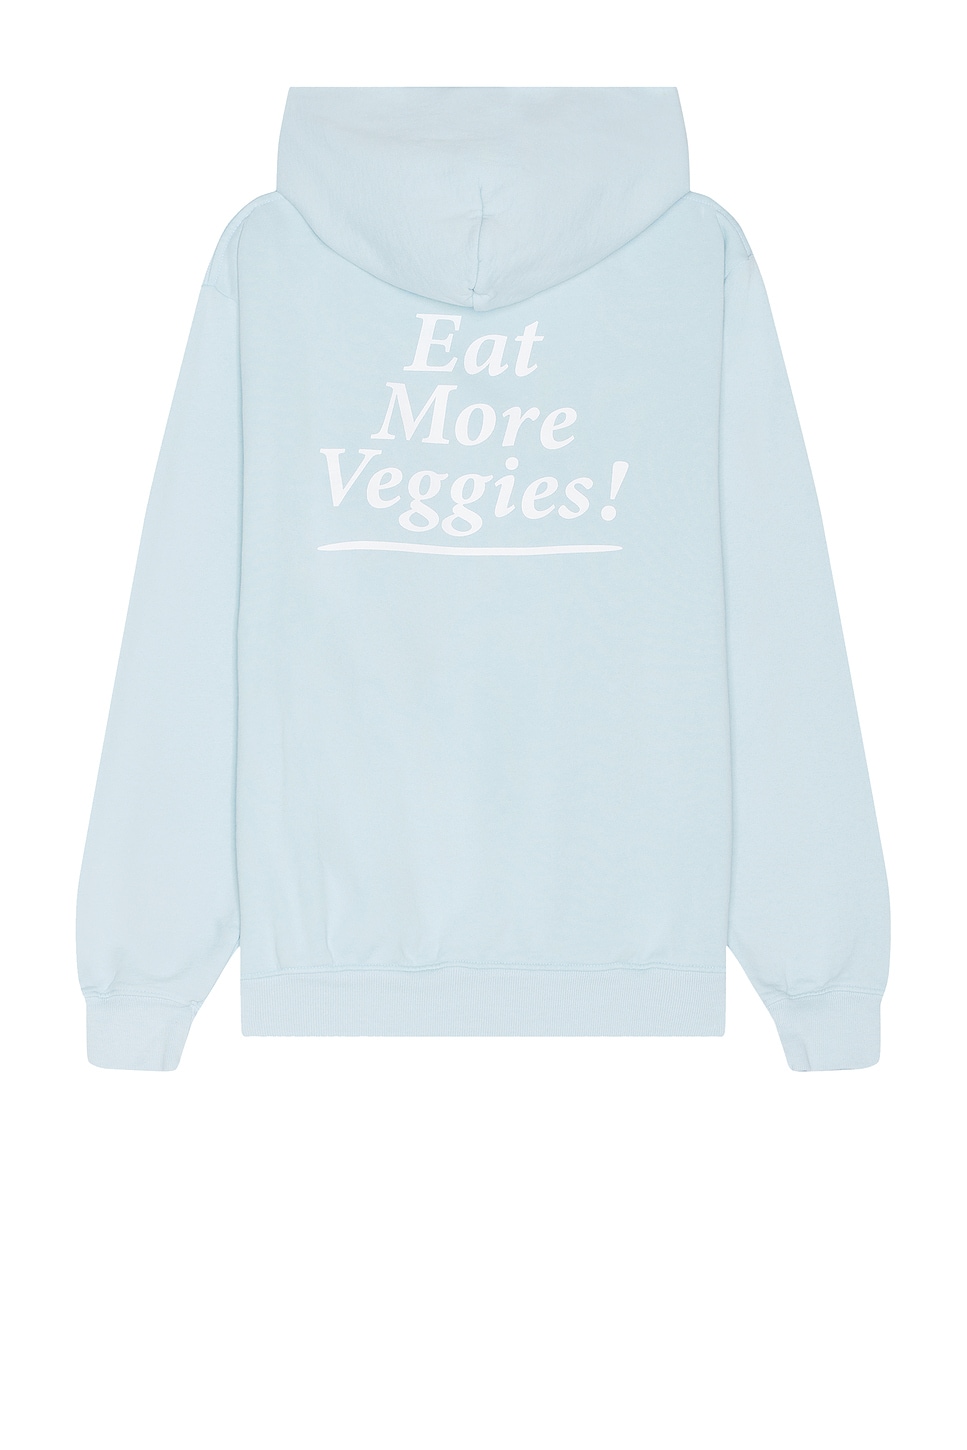 Image 1 of Sporty & Rich Eat More Veggies Hoodie in Baby Blue & White